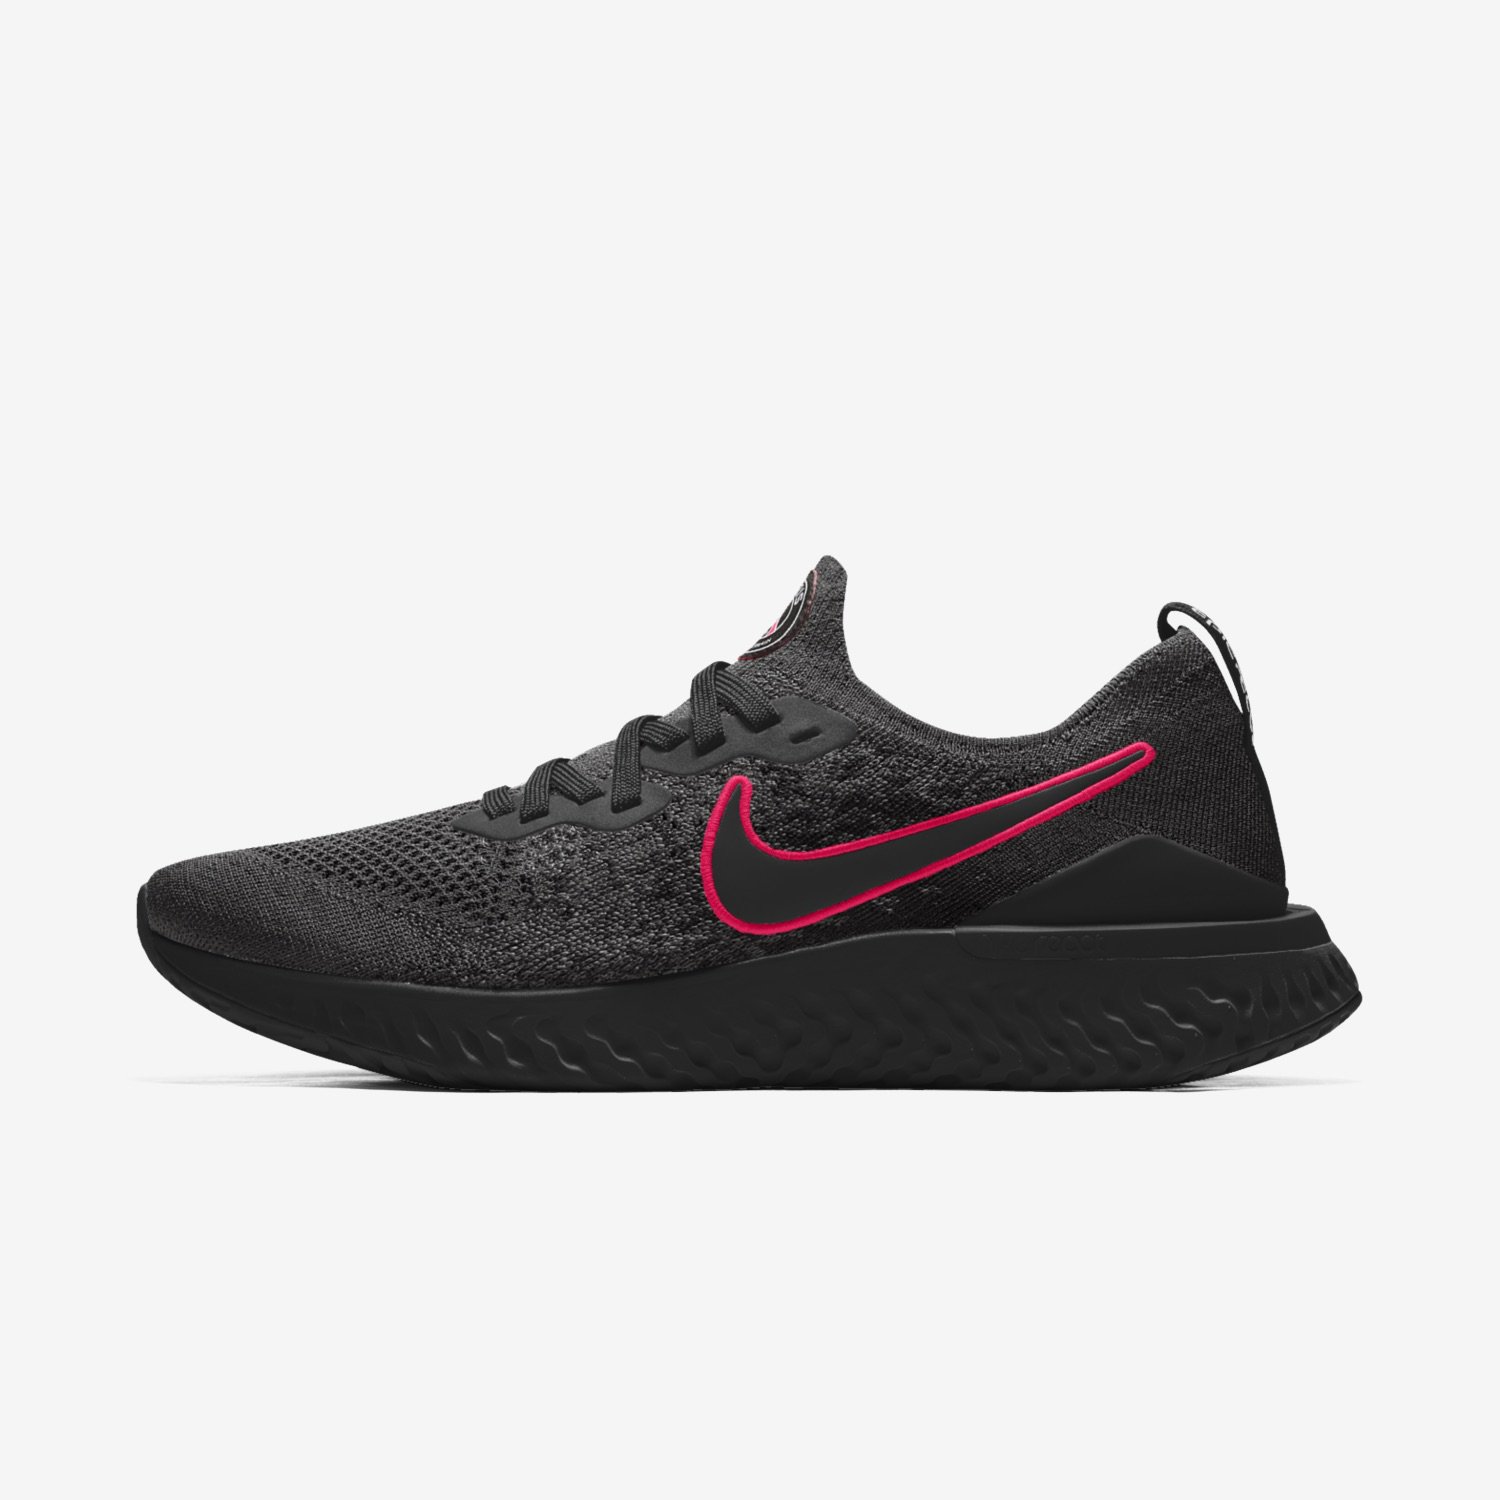 J23 iPhone App on Twitter: "PSG x Nike Epic React Flyknit 2 on Nike By You  Black/Pink -&gt; https://t.co/0puPTcFb3P White/Black/Pink -&gt;  https://t.co/9iaCZ9oHXm Blue/Red -&gt; https://t.co/QPsekqPpWs  White/Blue/Red -&gt; https://t.co/kf8n7O5dLl https ...